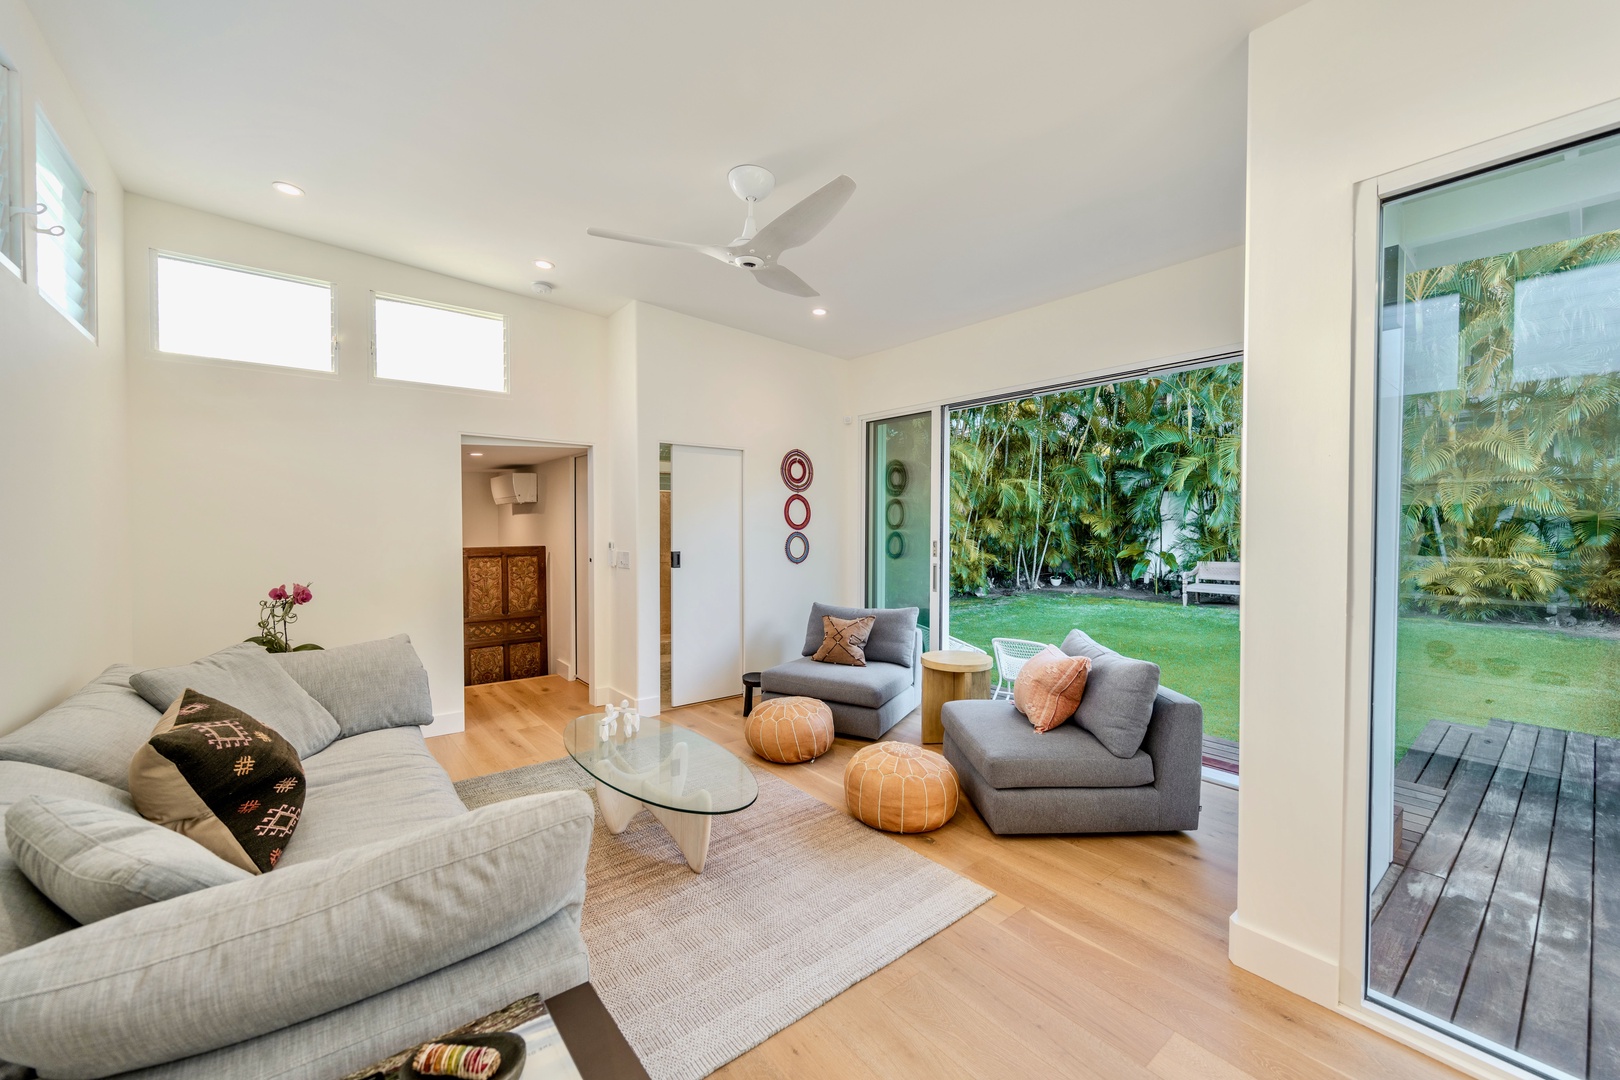 Kailua Vacation Rentals, Lanikai Ola Nani - Experience the luxury of space in our open living area.